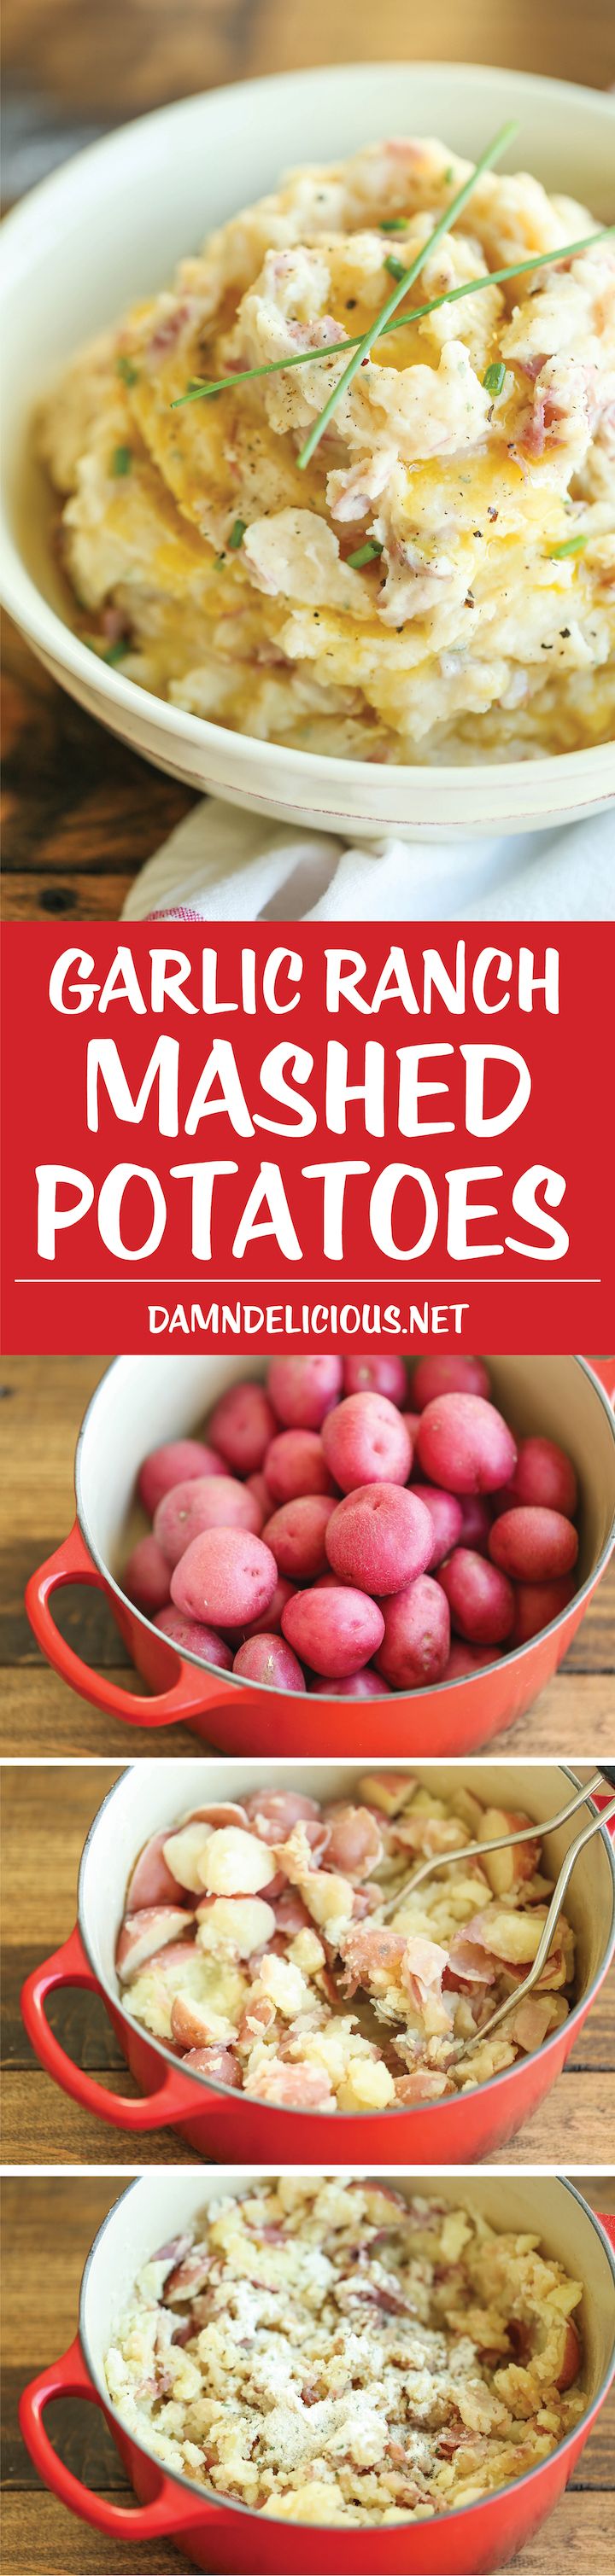 Garlic Ranch Mashed Potatoes - All you need is 5 ingredients and 10 min prep work for the BEST and EASIEST mashed potatoes ever! A must for the holidays!